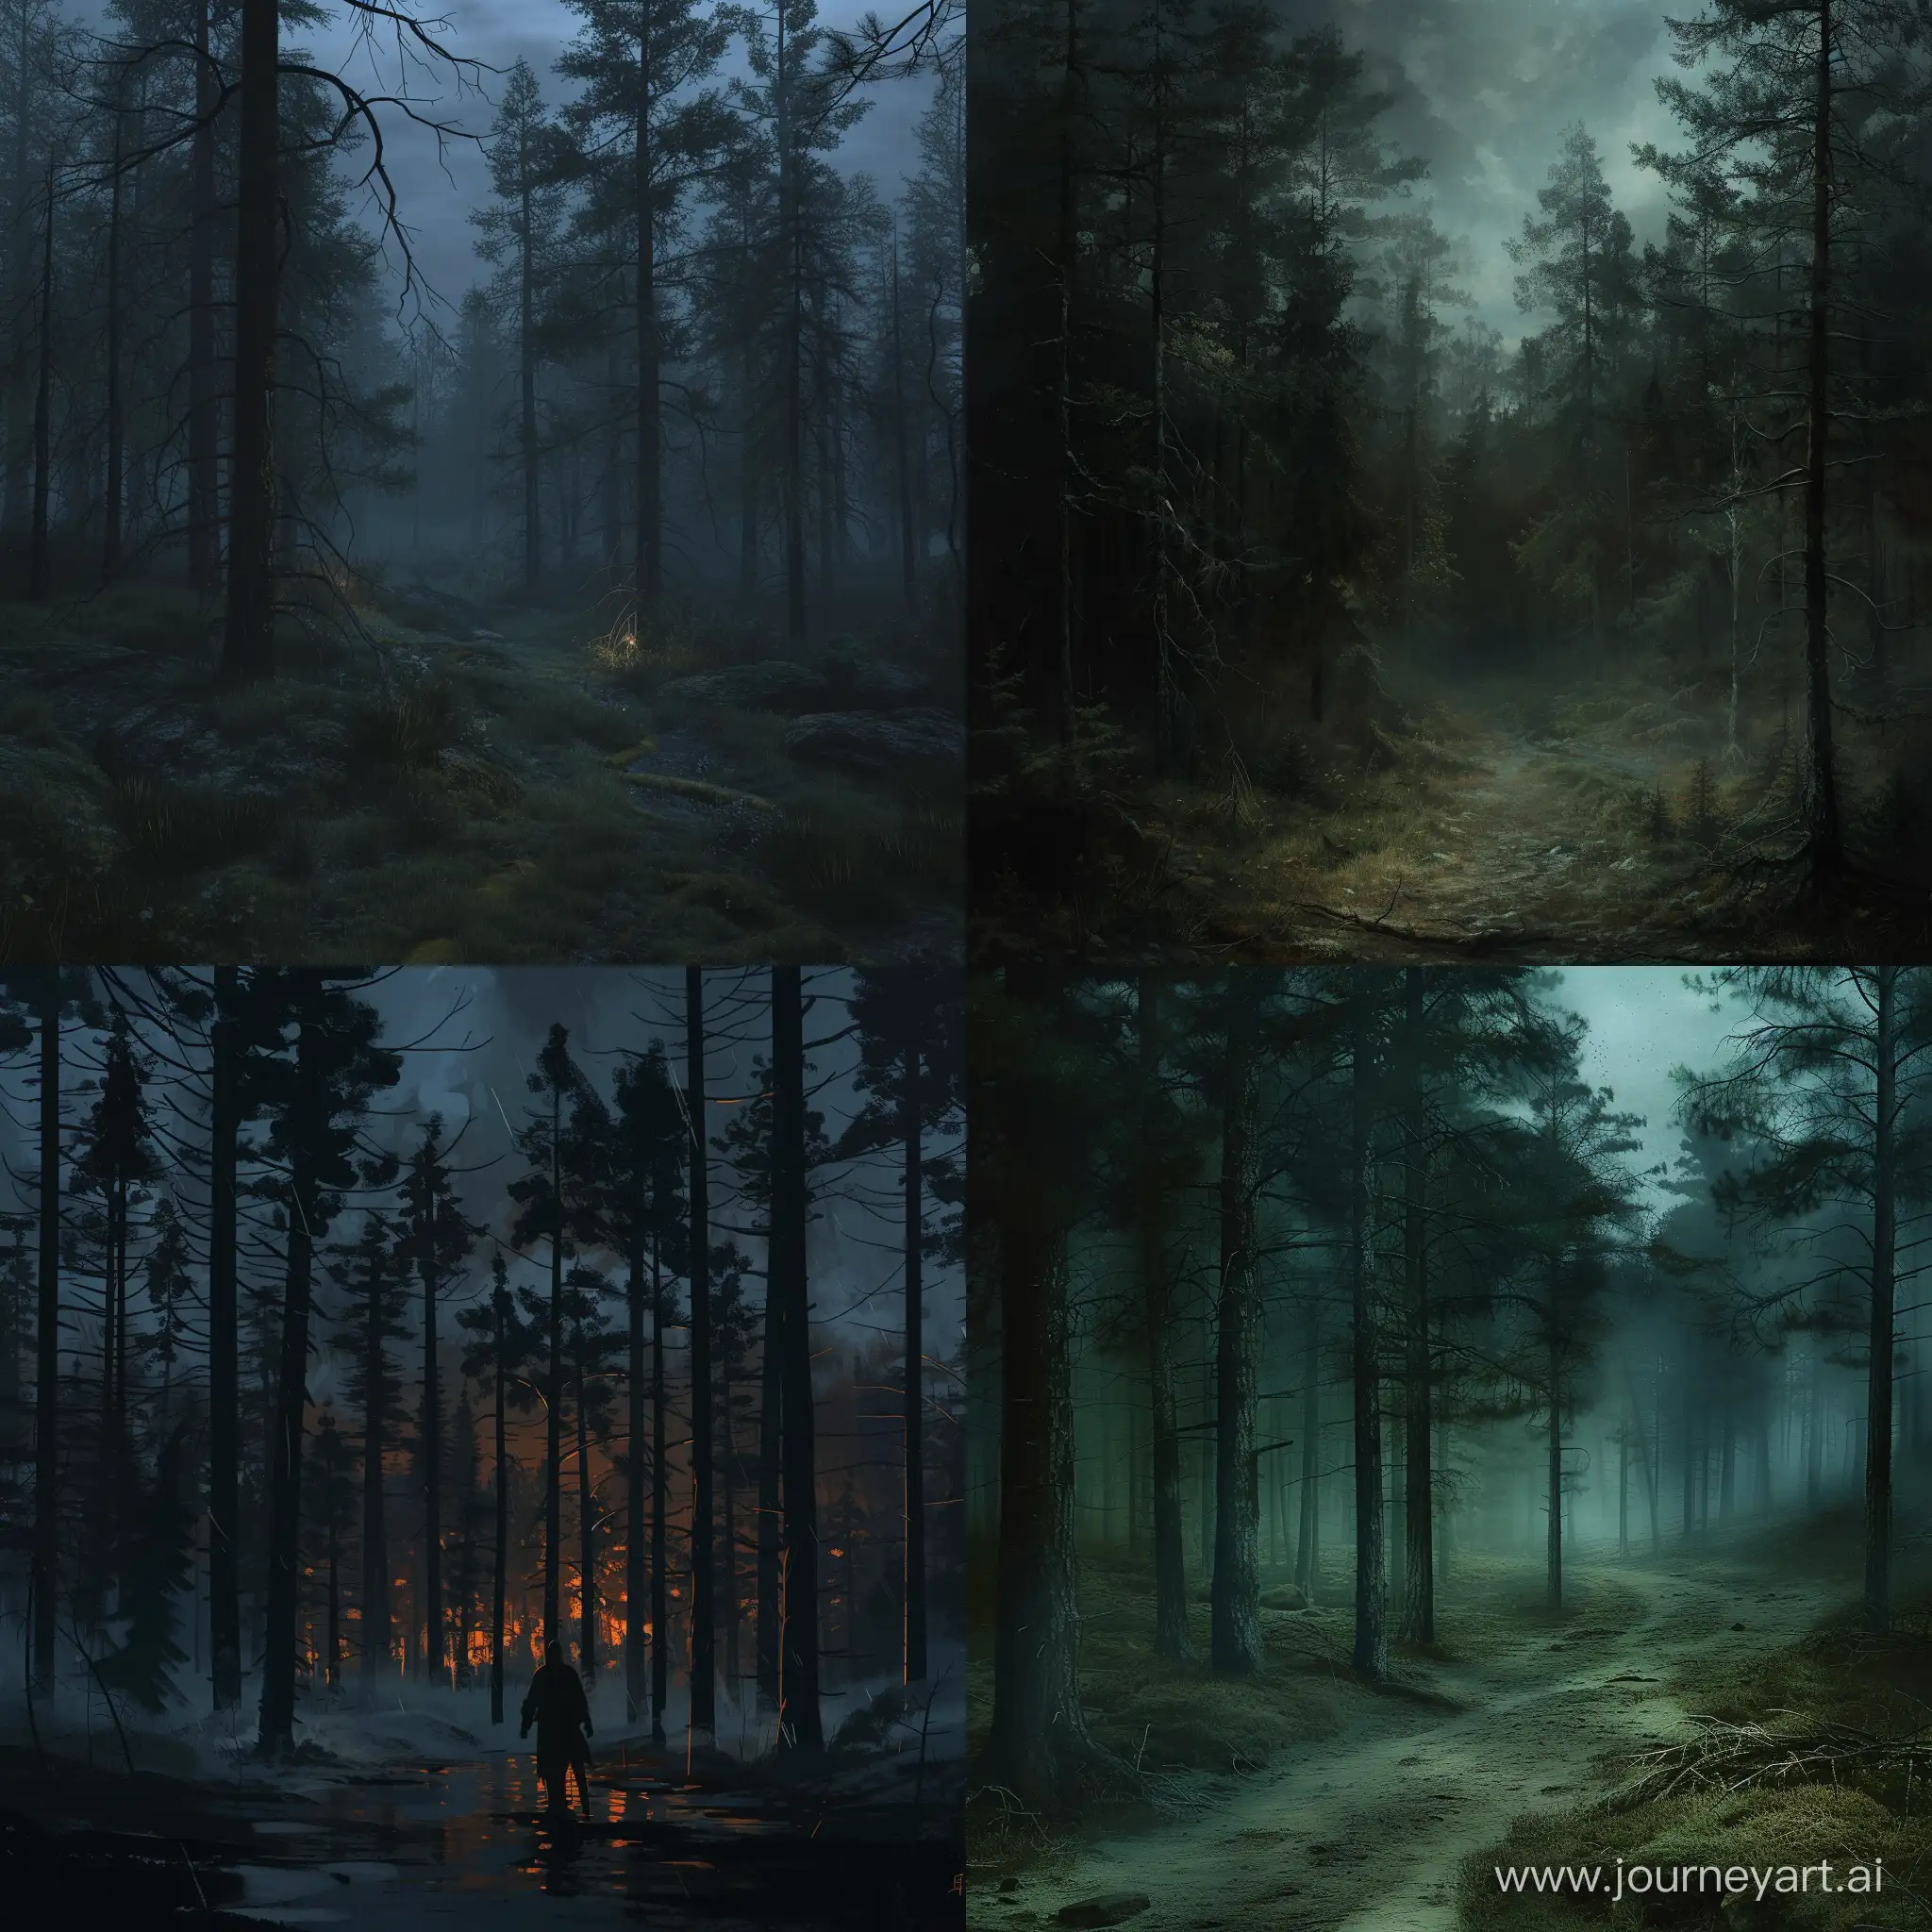 Dark mythical forests of the taiga dark souls style